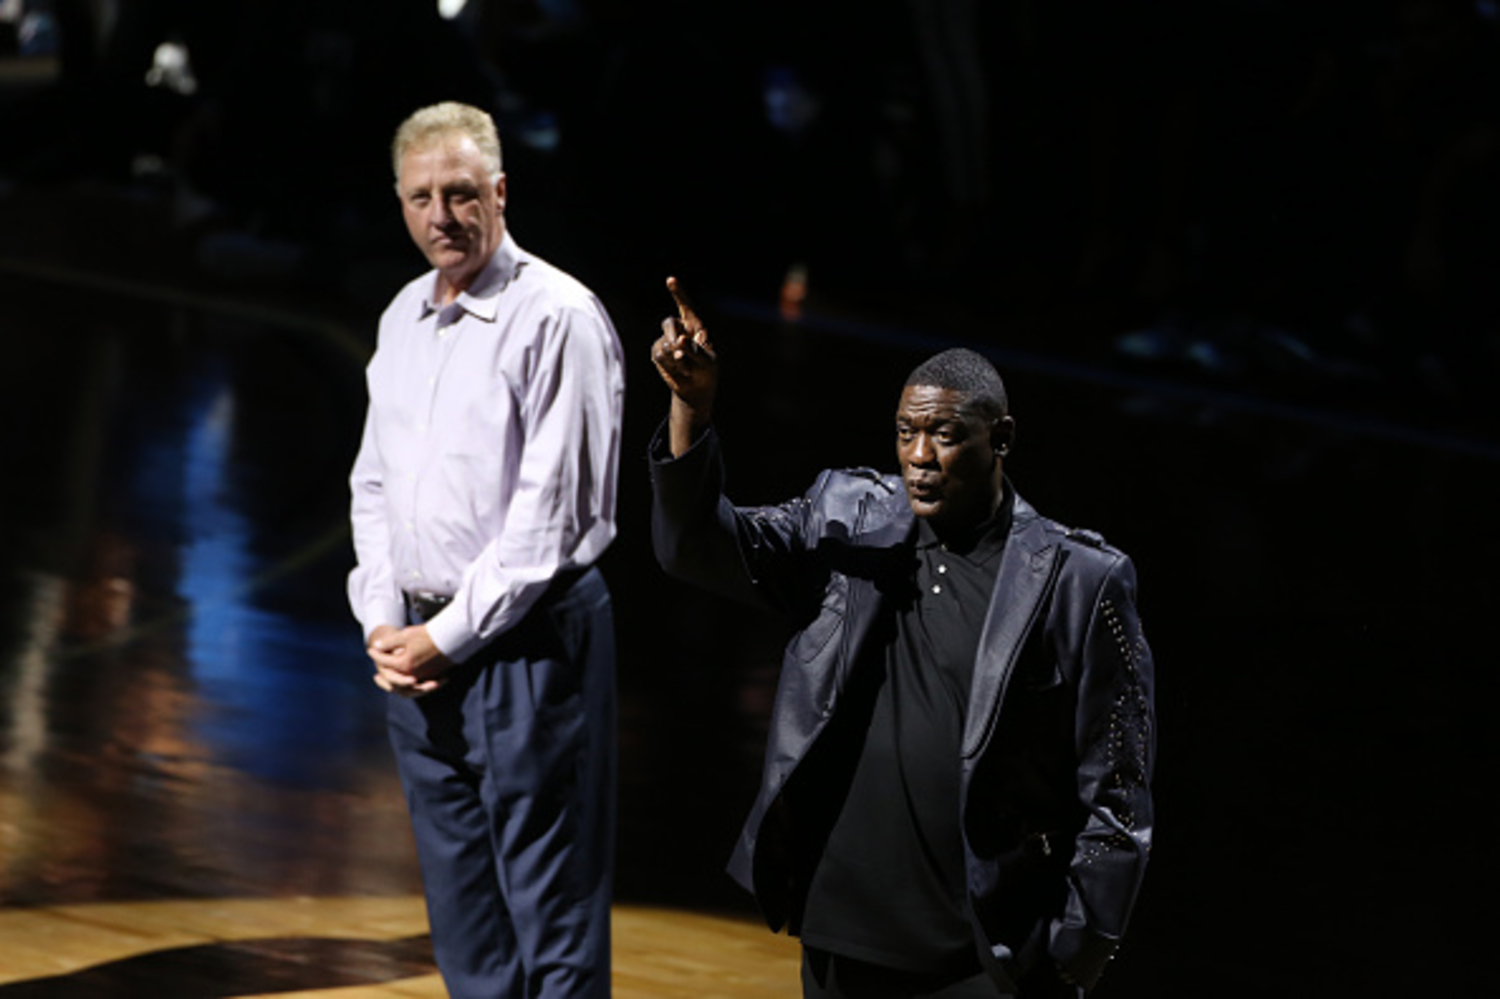 Larry Bird Got His Revenge on Shawn Kemp When They First Met in the NBA: ‘I’ve Got Something for You Tonight’